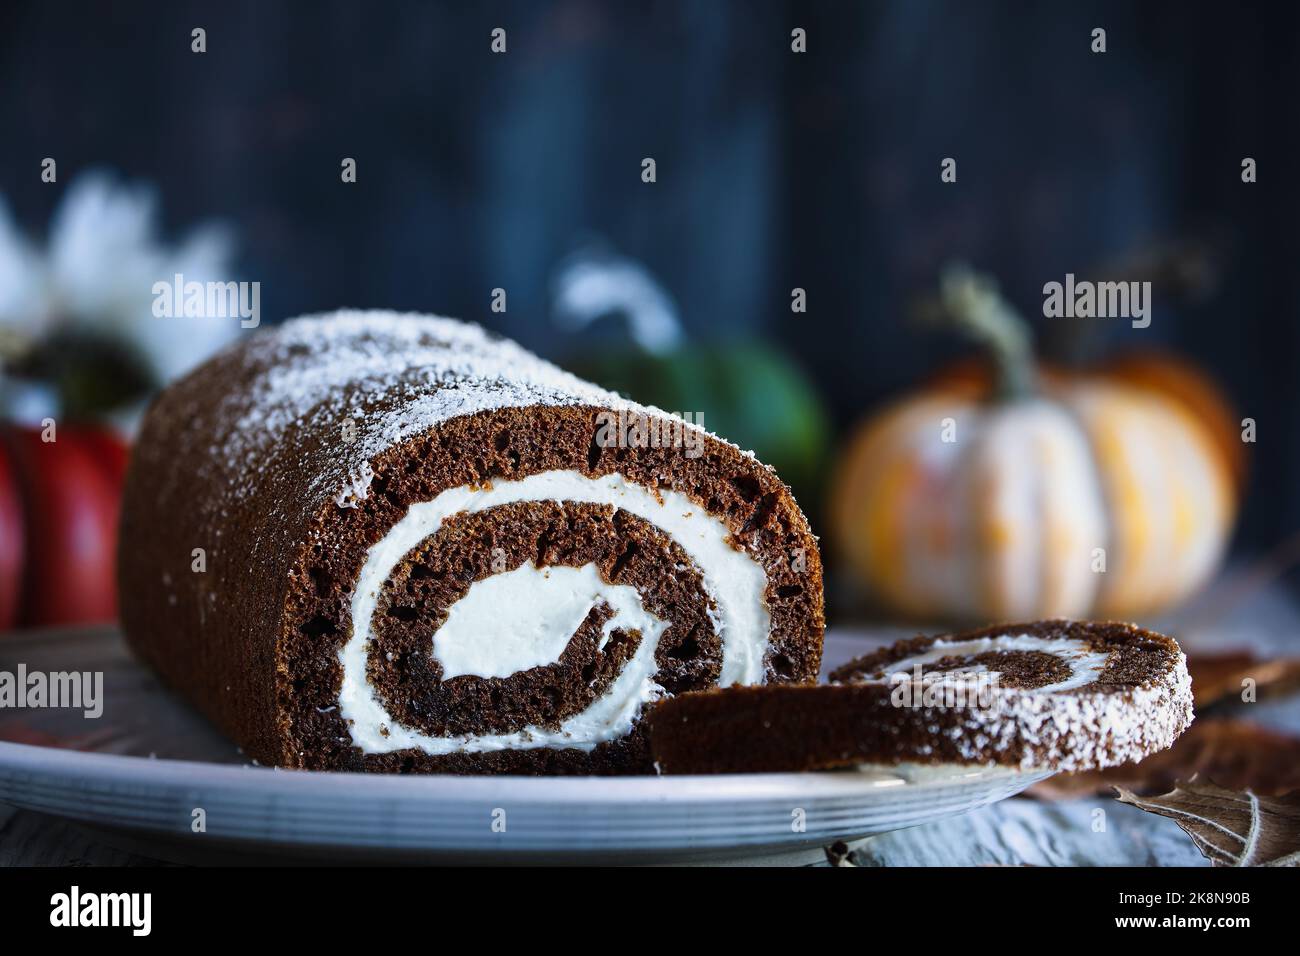 Fresh baked round chocolate pumpkin roll cake with powdered sugar and cream cheese filling. Selective focus with blurred foreground background. Stock Photo